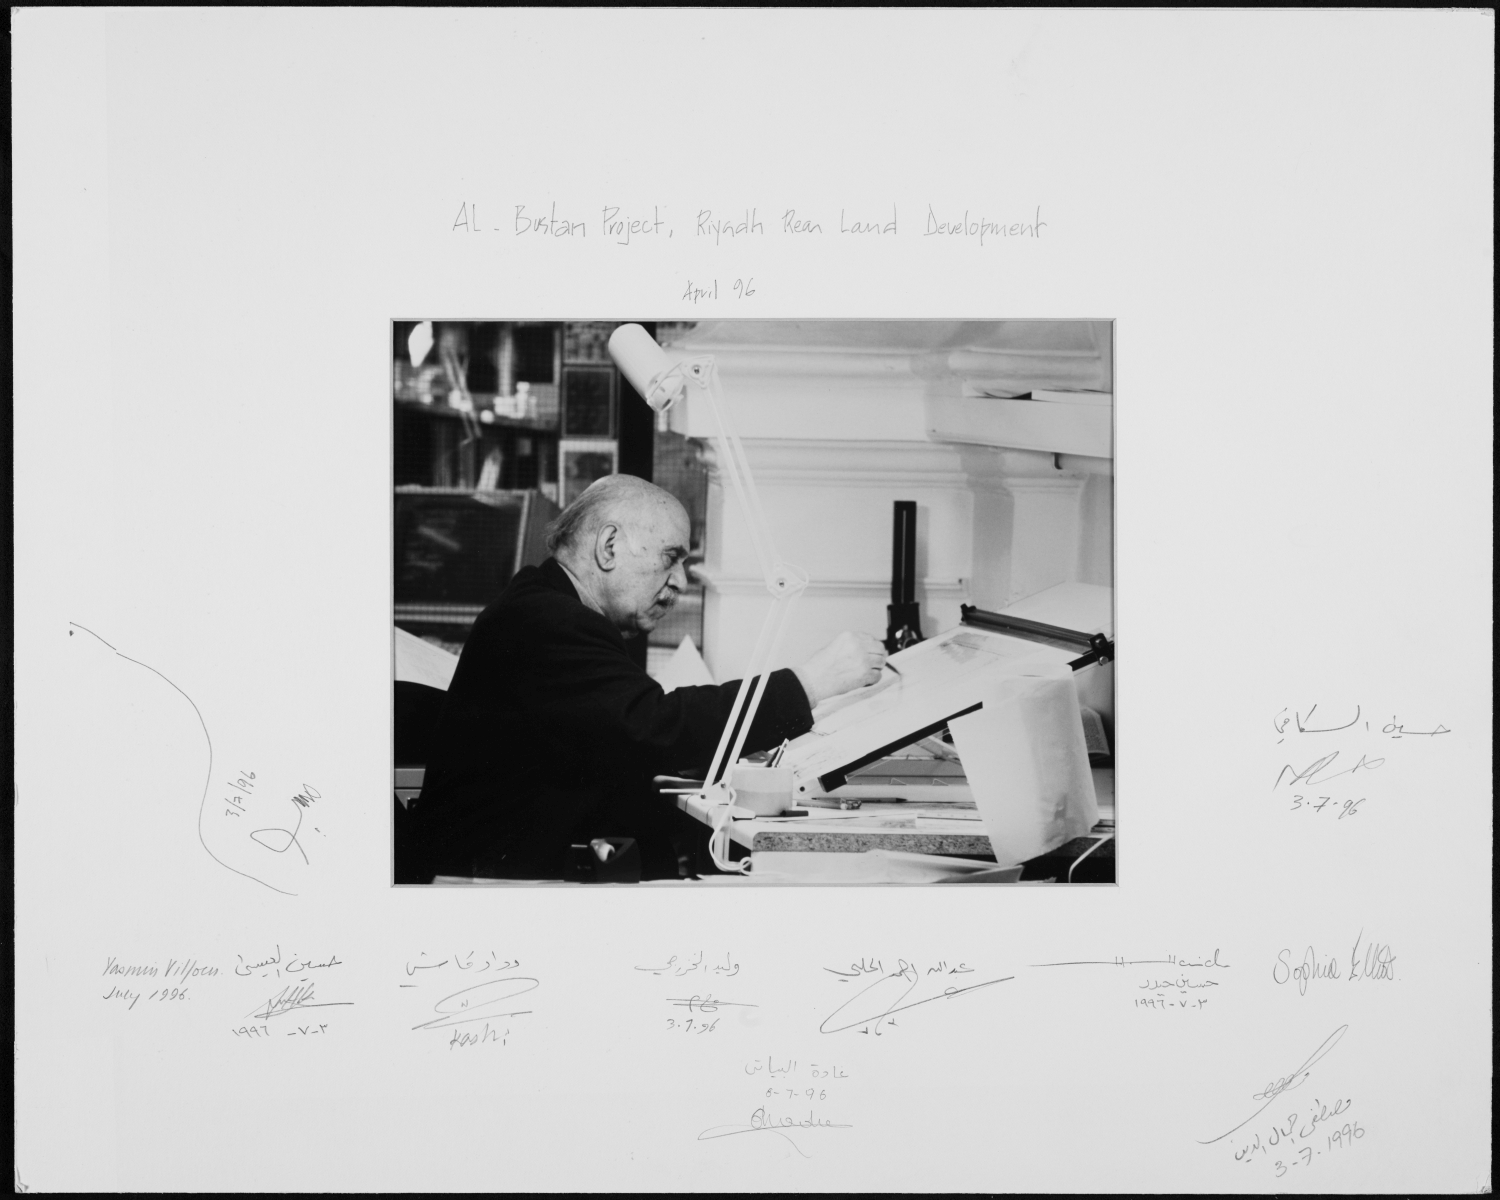 Mohamed Makiya - <p>April 1996 photo board showing Makiya at his drawing table, signed by staff members in commemoration of the Al-Bustan Project, Riyadh Rear Land Development</p>